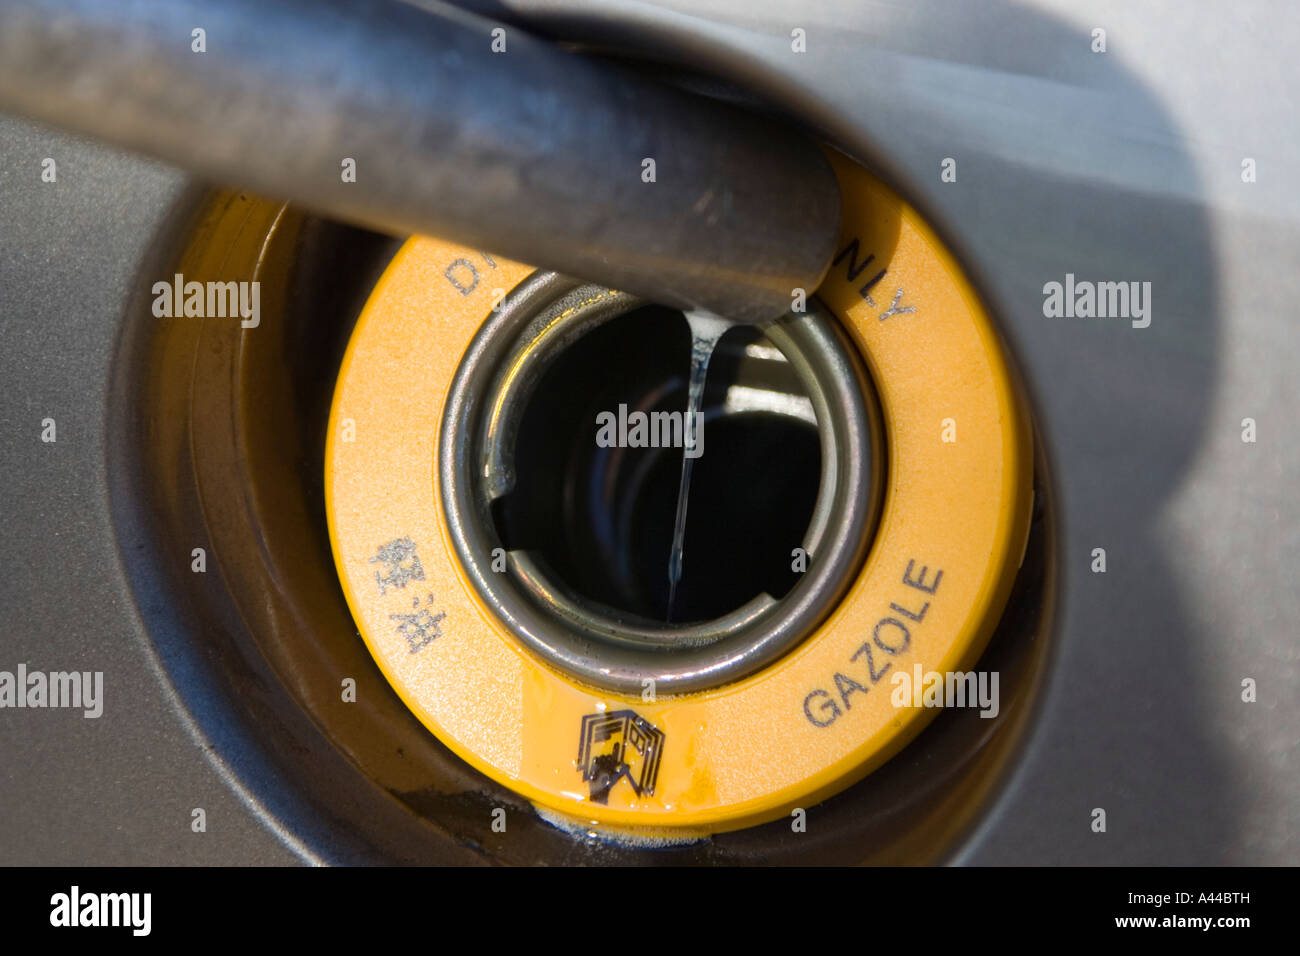 https://c8.alamy.com/comp/A44BTH/filling-tank-with-diesel-fuel-from-garage-pump-close-up-tank-nozzle-A44BTH.jpg